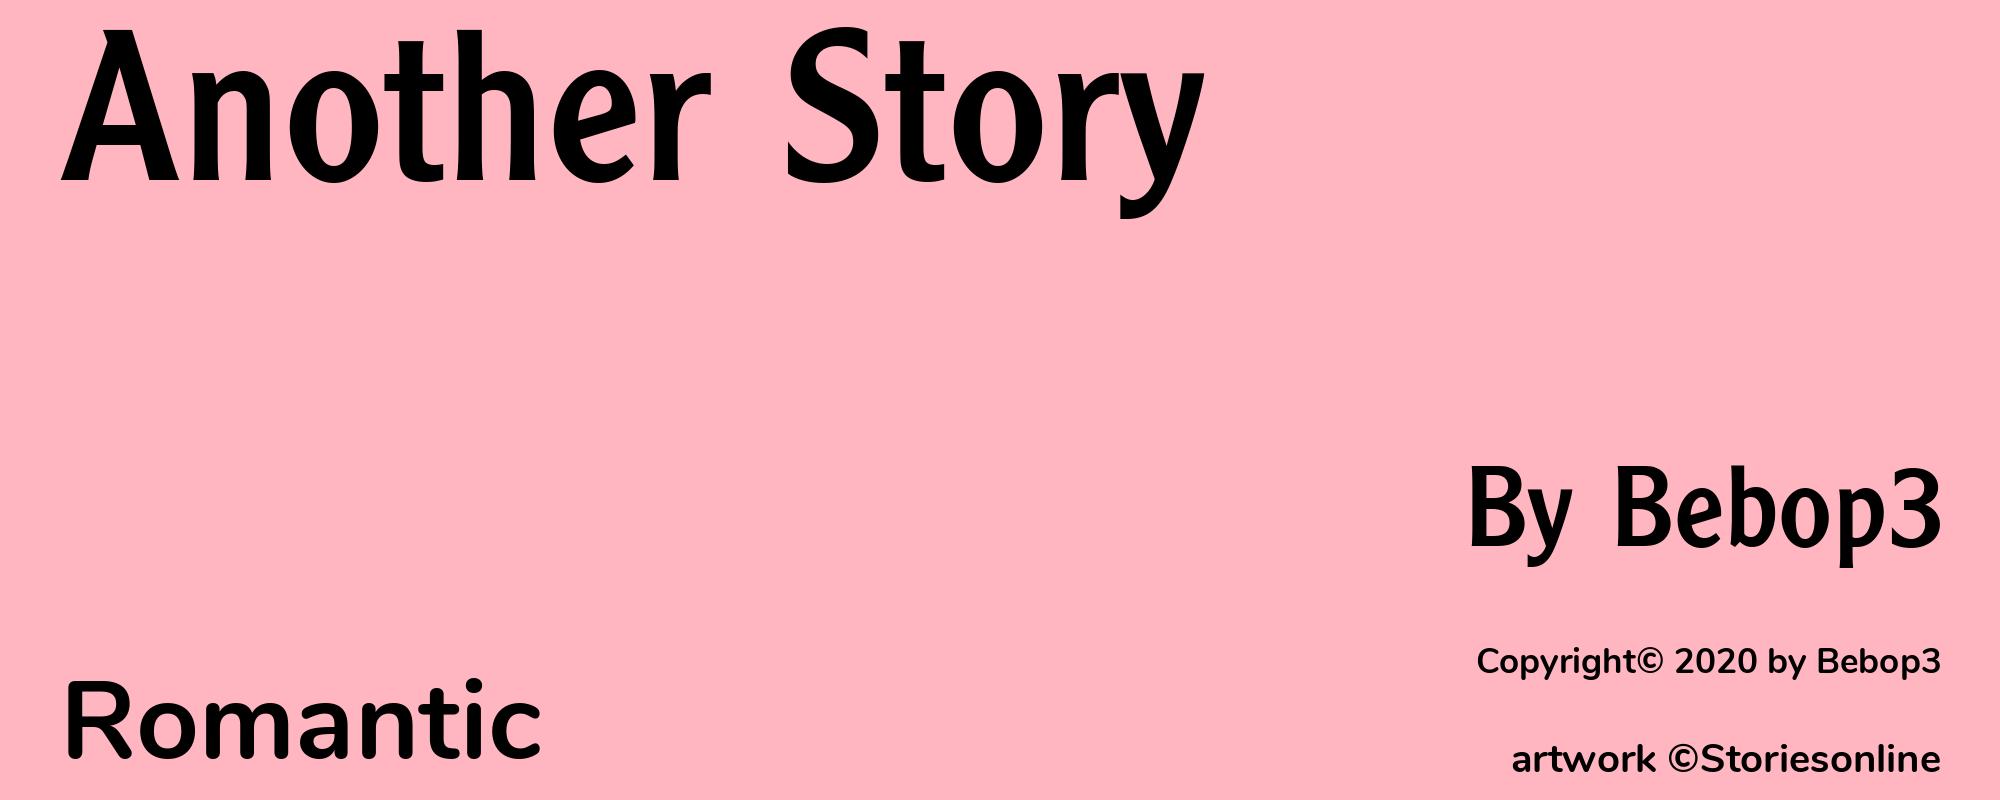 Another Story - Cover